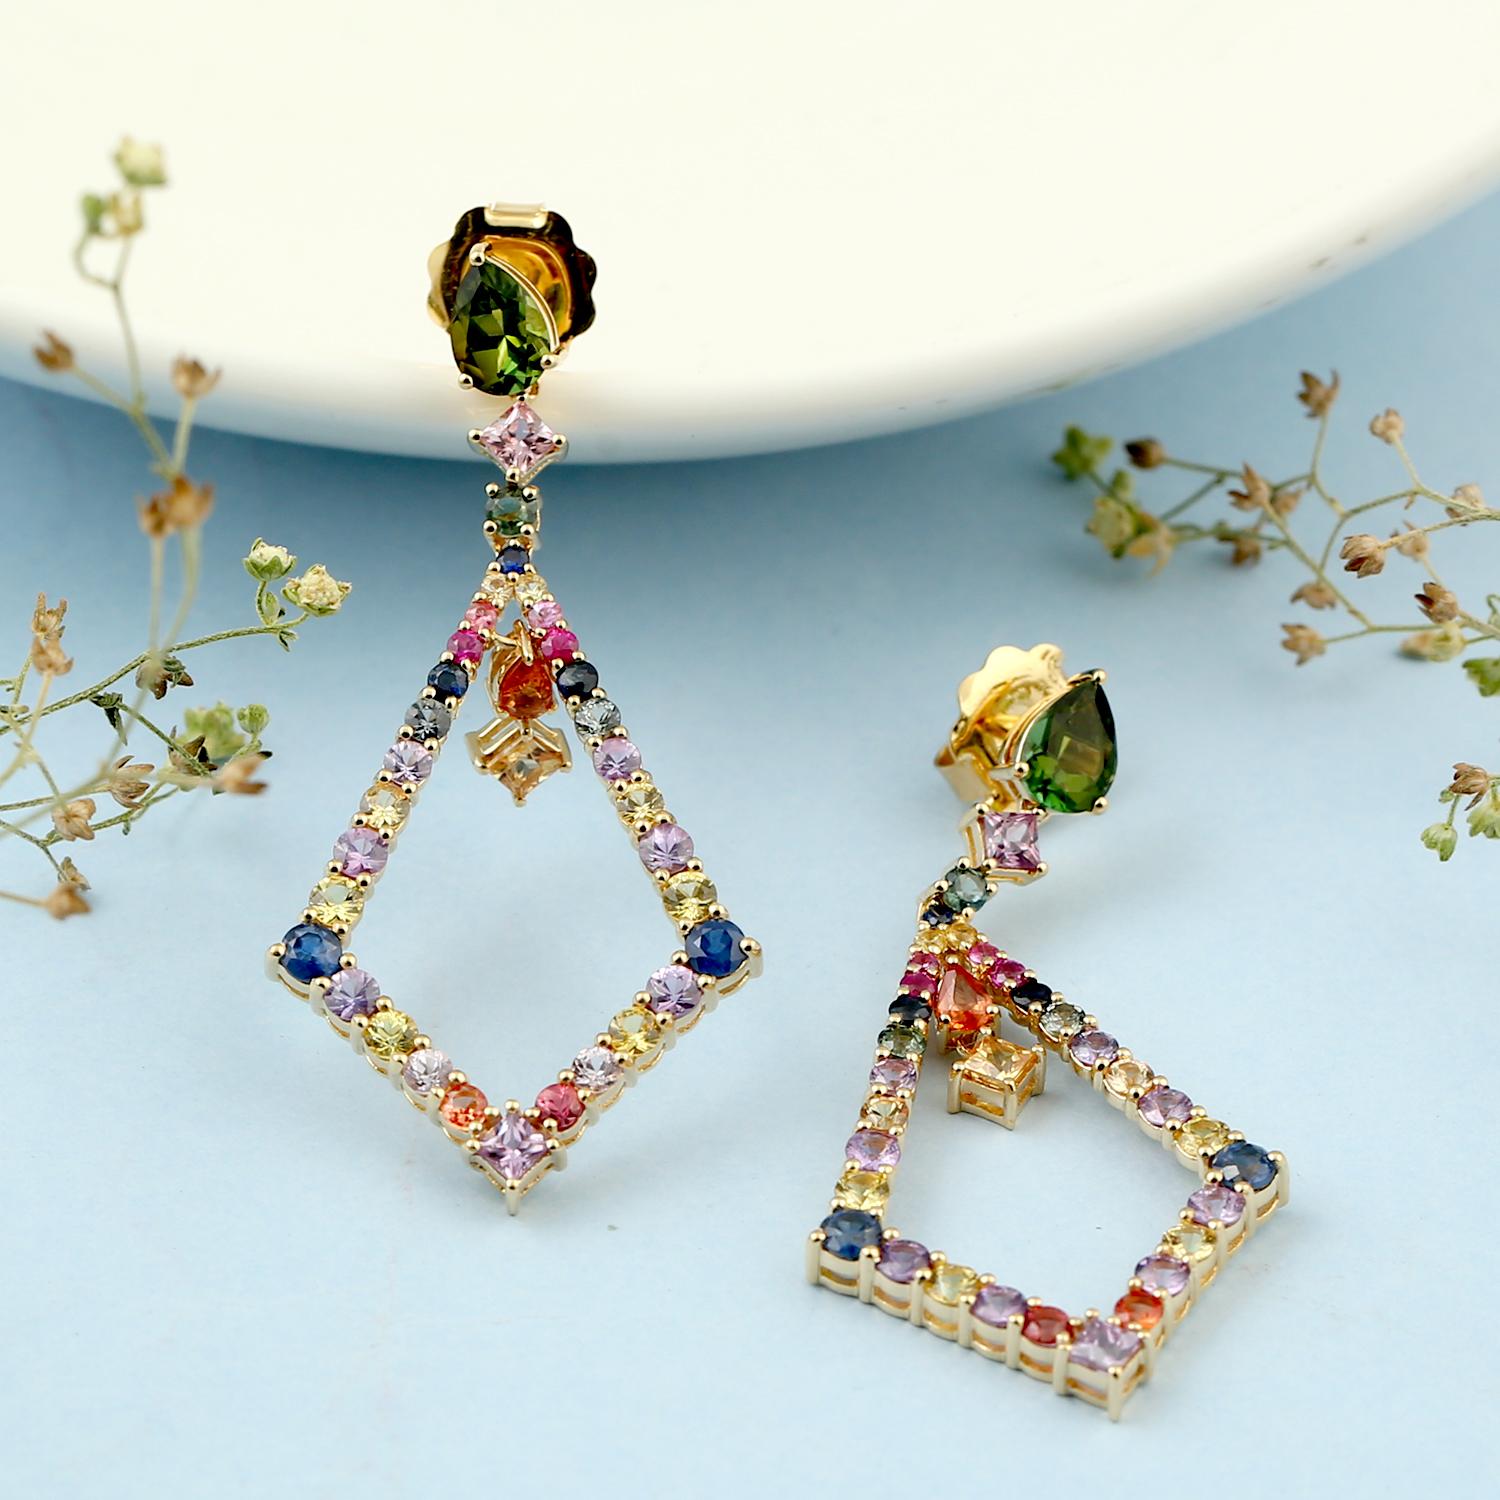 These earrings feature a unique rhombus shape that has been carefully crafted in 18k gold. The rhombus is adorned with a beautiful array of multi-colored sapphires and tourmaline gemstones that add a pop of color and vibrancy to the